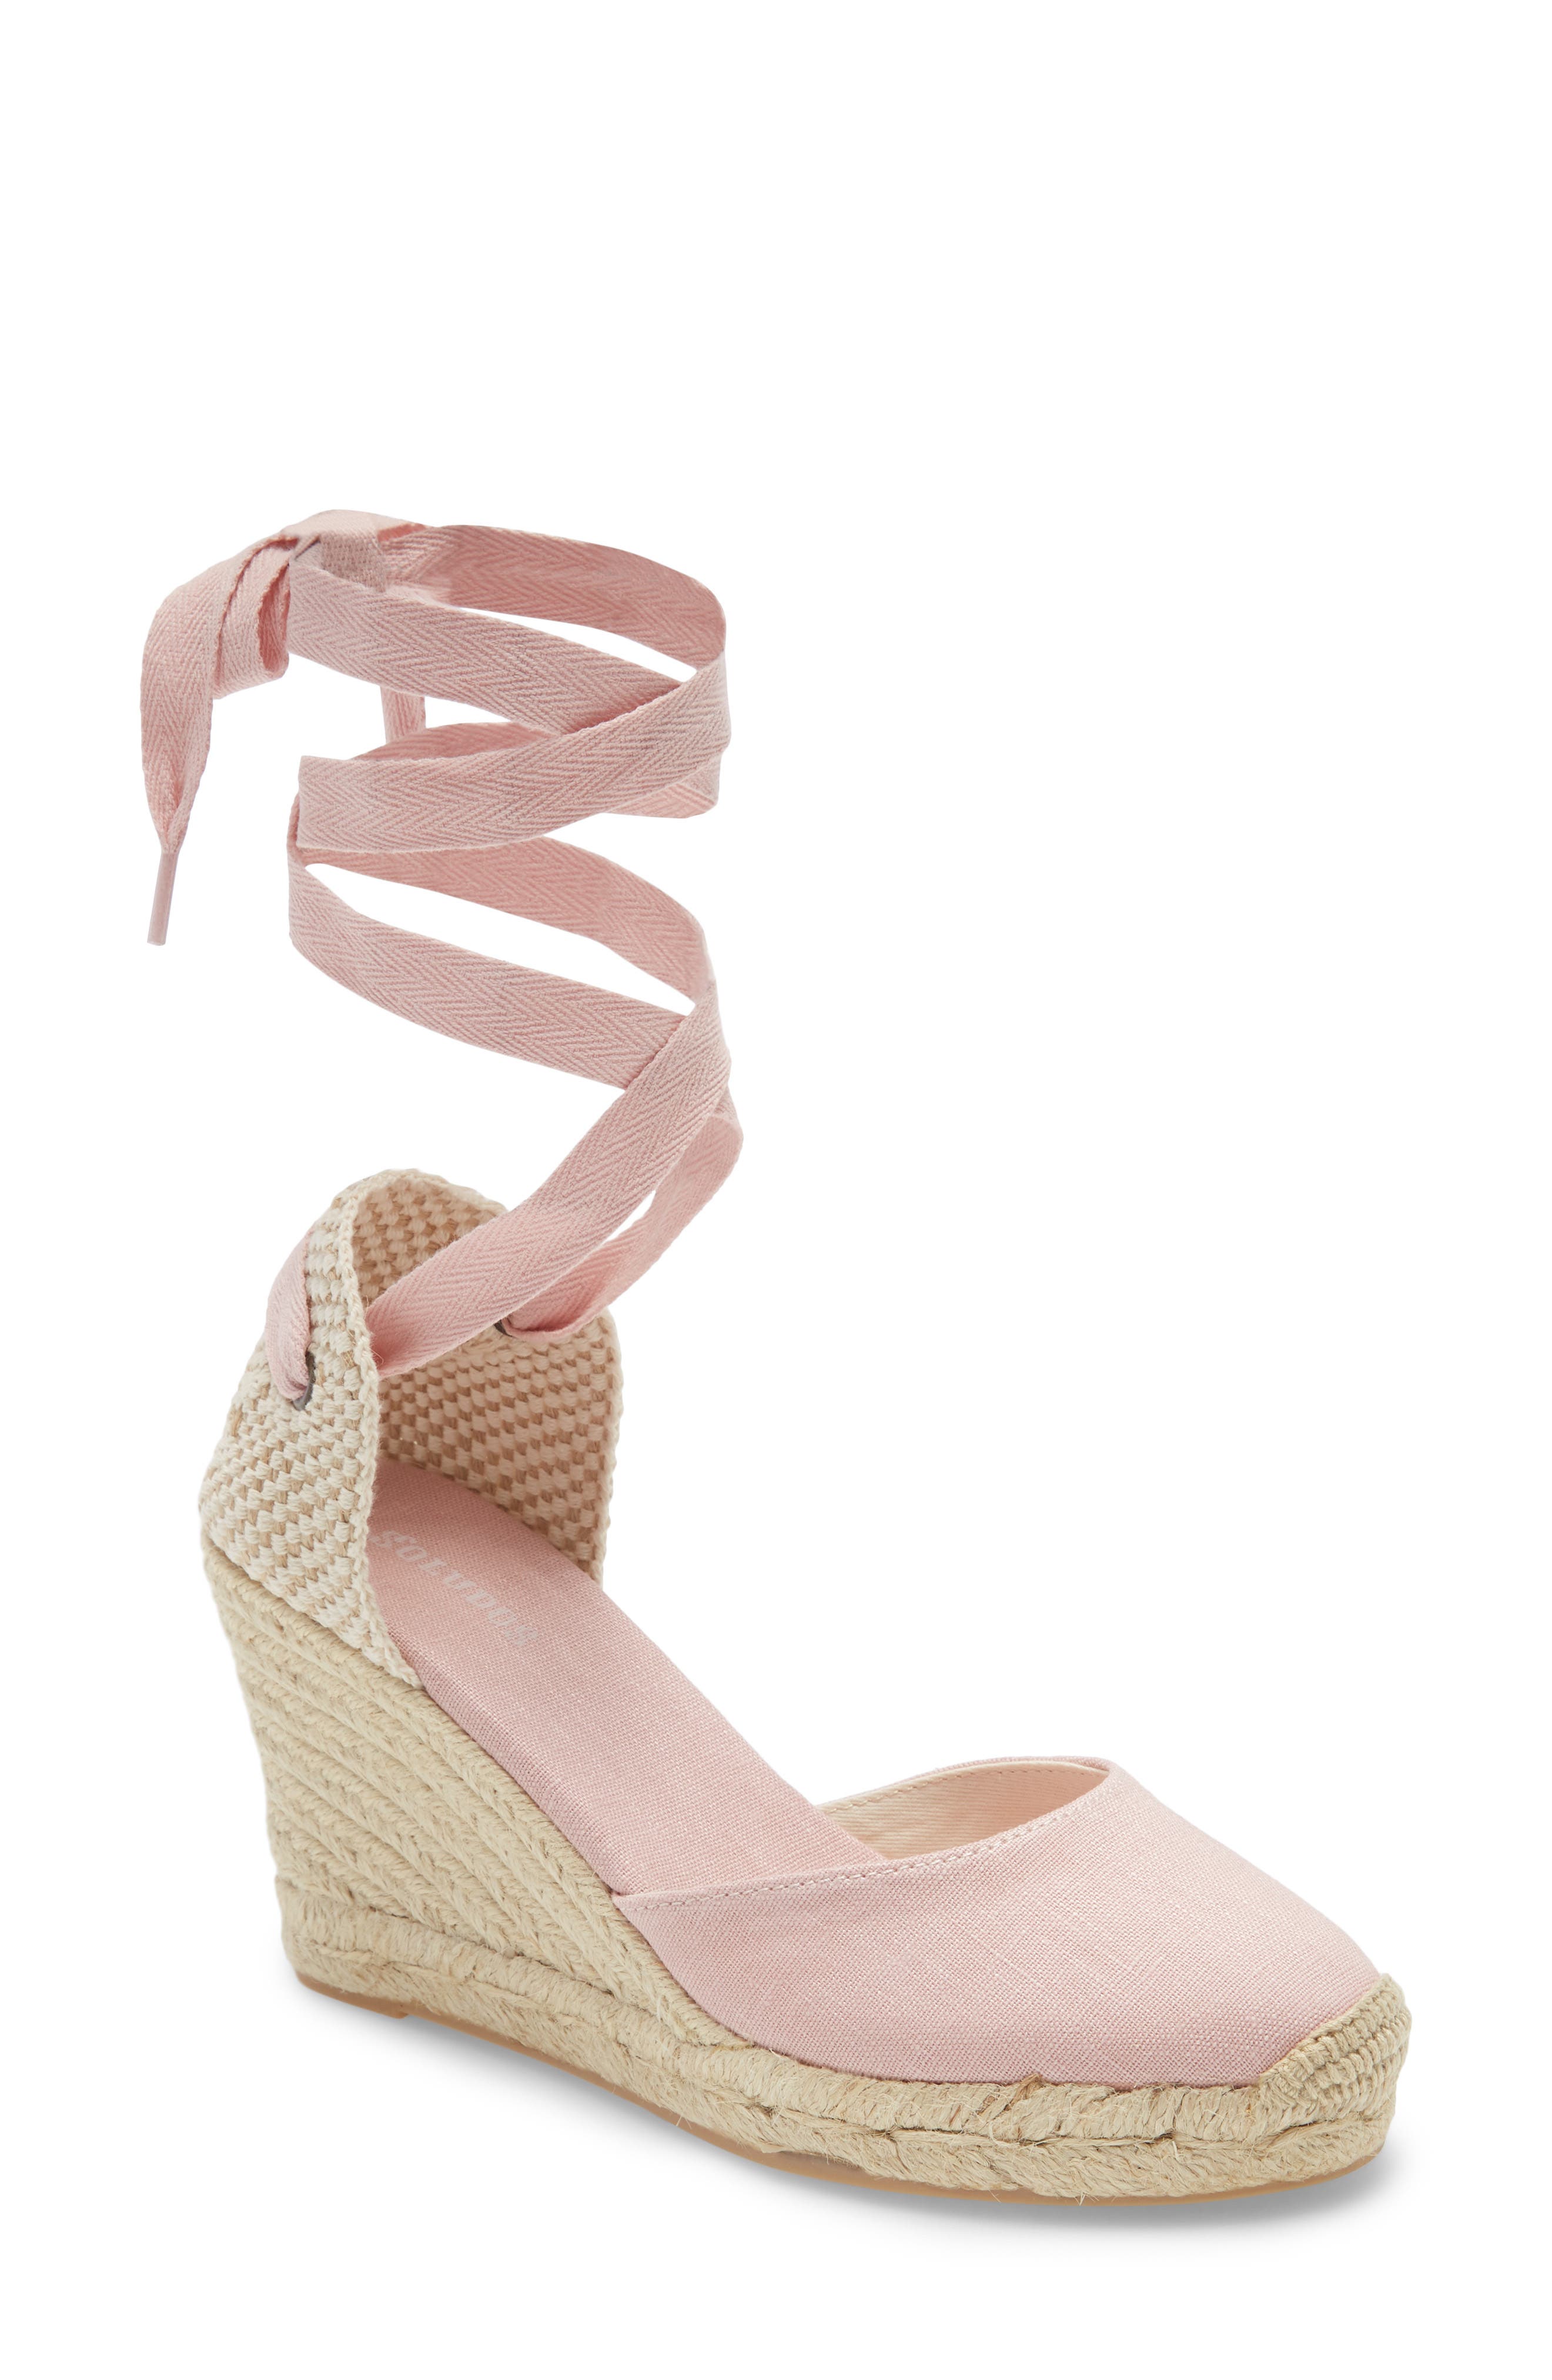 Shoes Sandals Espadrille Sandals Tory Burch Espadrille Sandals pink-natural white casual look 